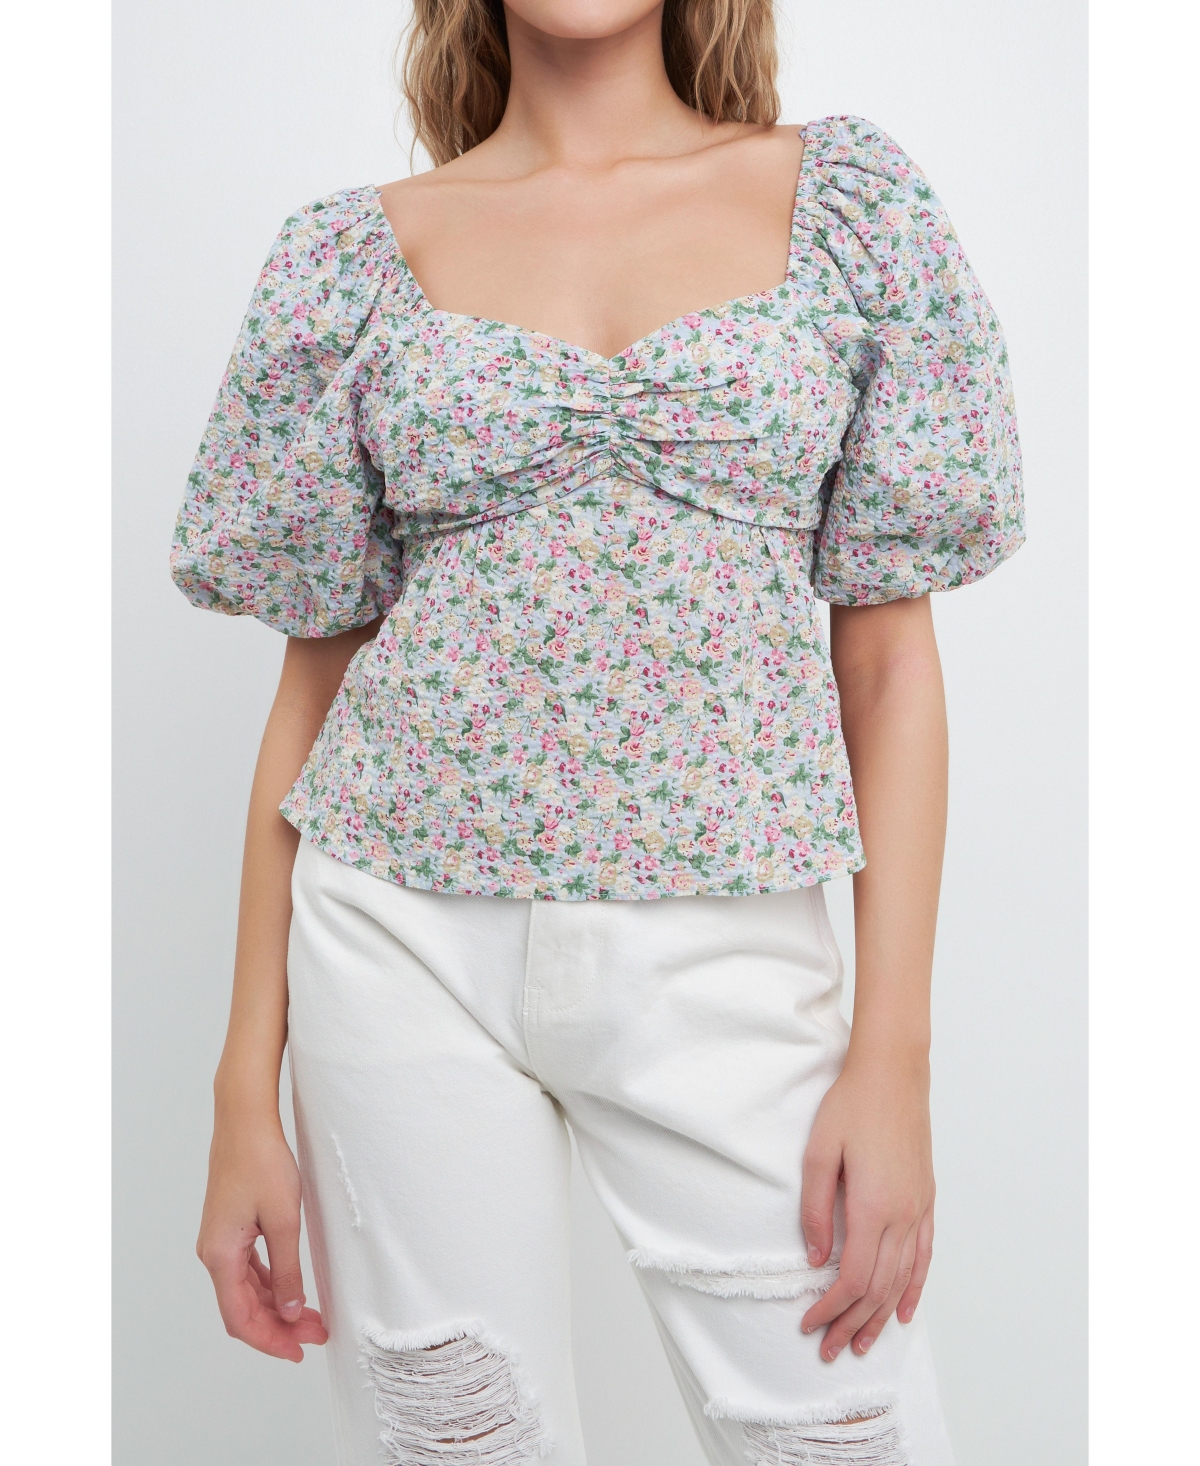 Free The Roses Women's Floral Tied Back Top